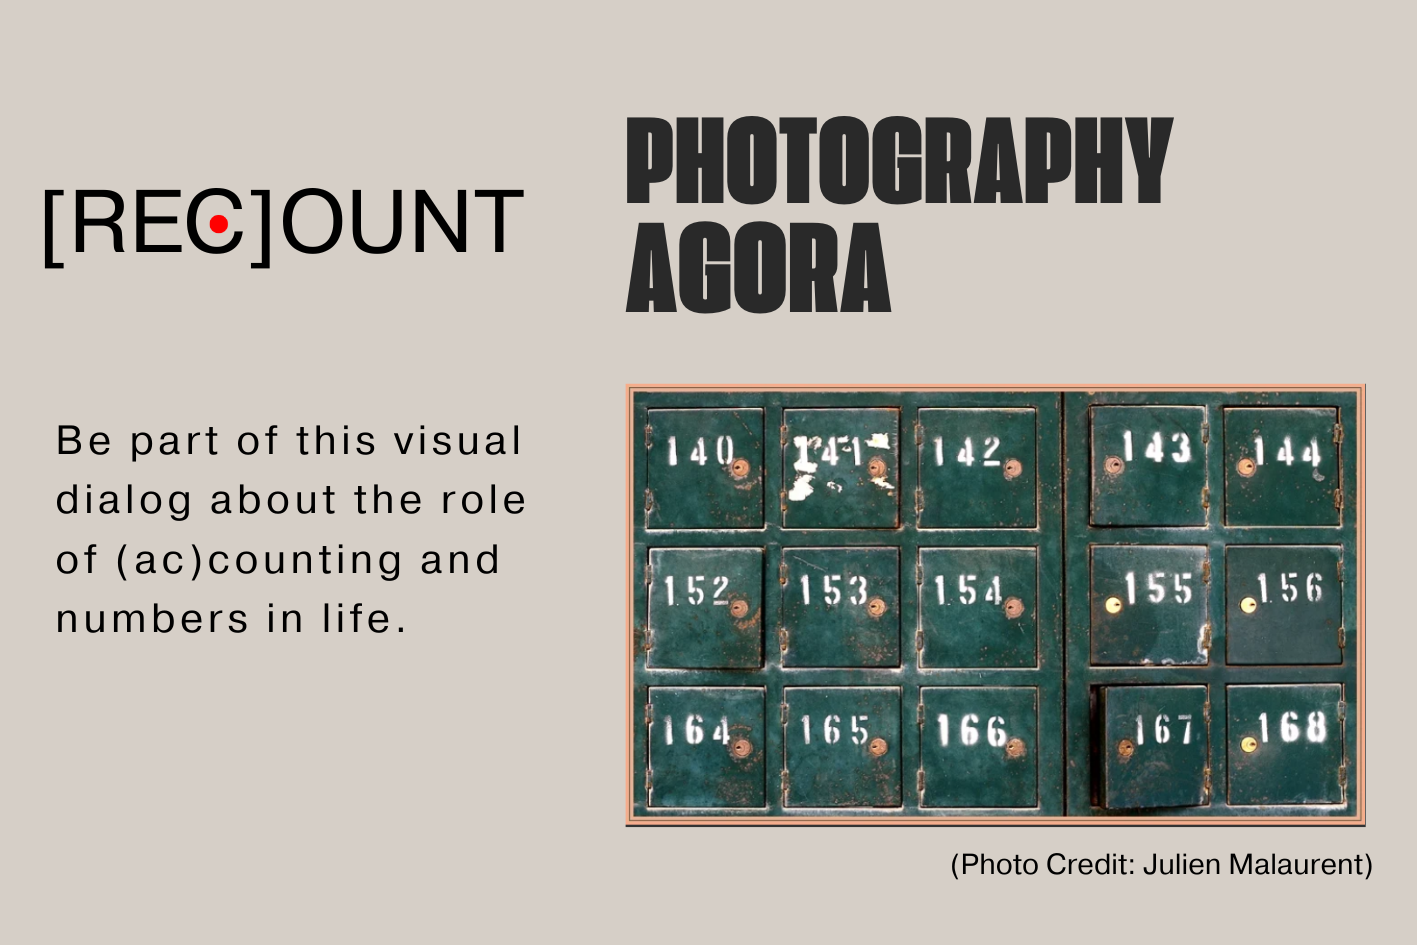 Recount Photography Agora: Be part of this visual dialogue about the role of accounting and numbers in life. Text pictured with a filing cabinet